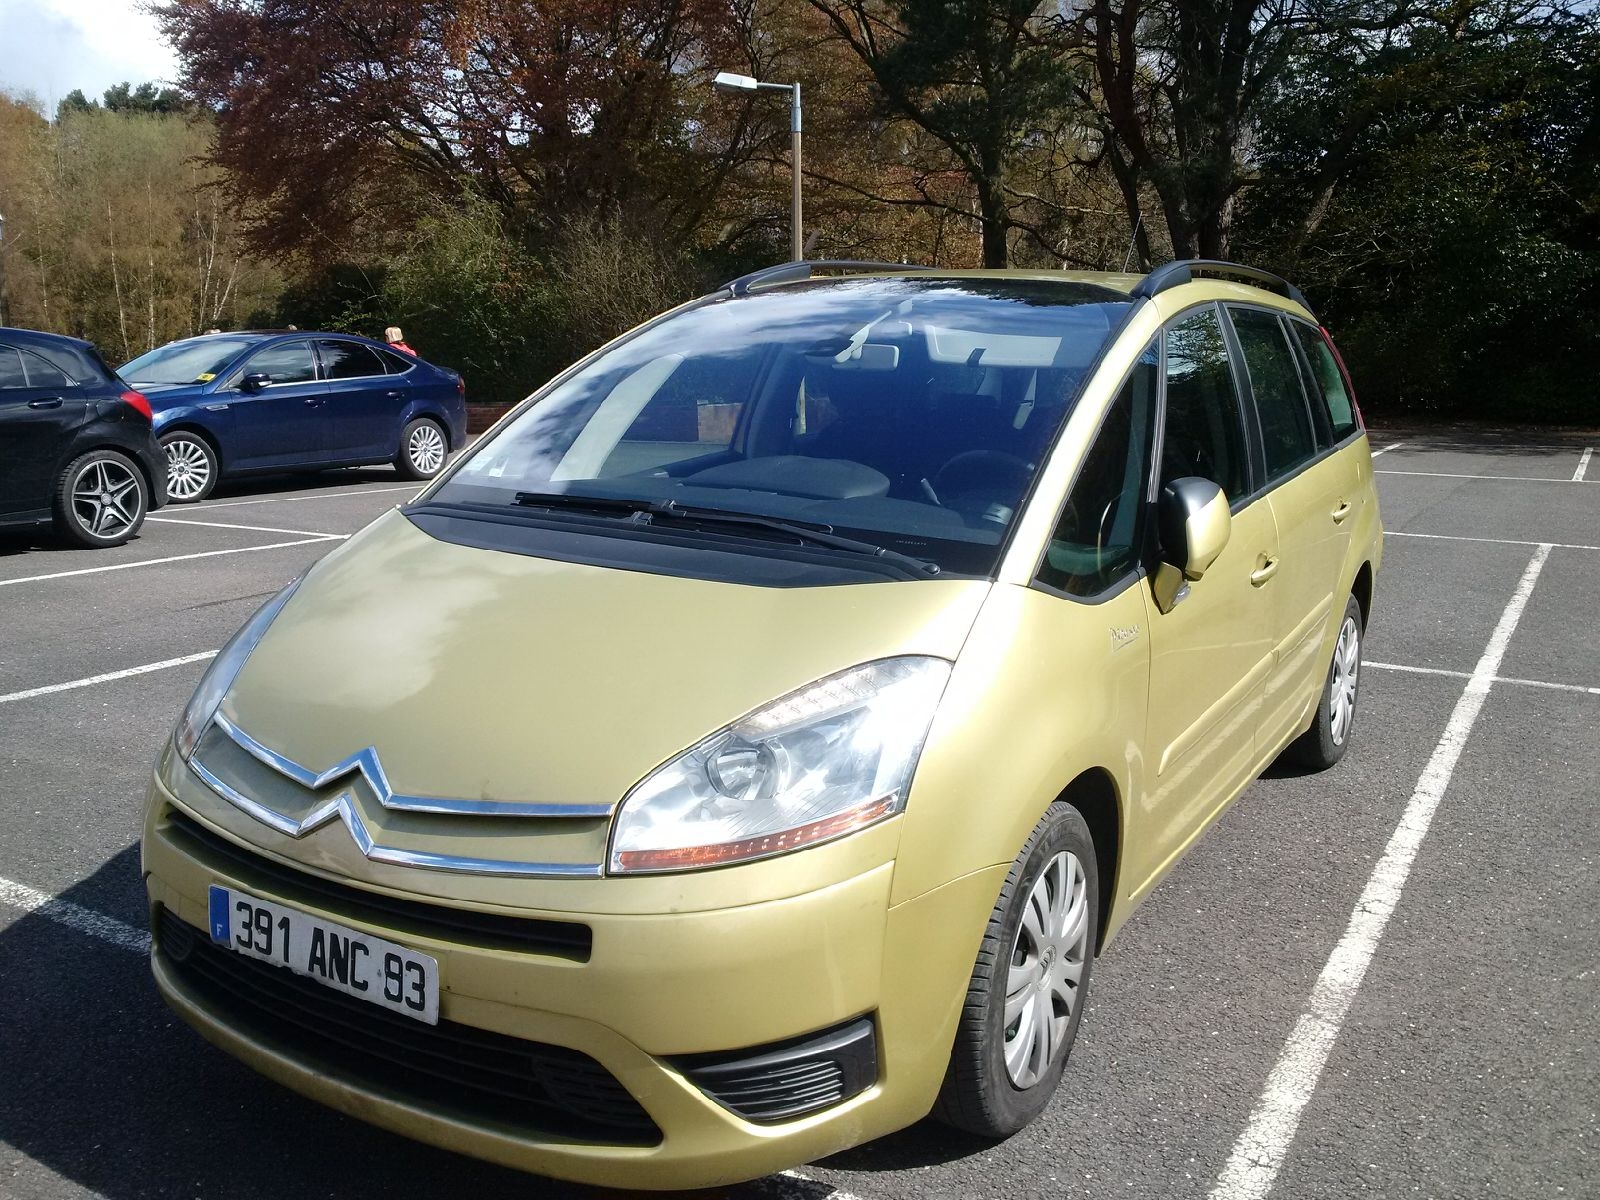 Left hand drive CITROEN C4 GRAND PICASSO 1.6 HDI 110 7 Seats FRENCH REGISTERED